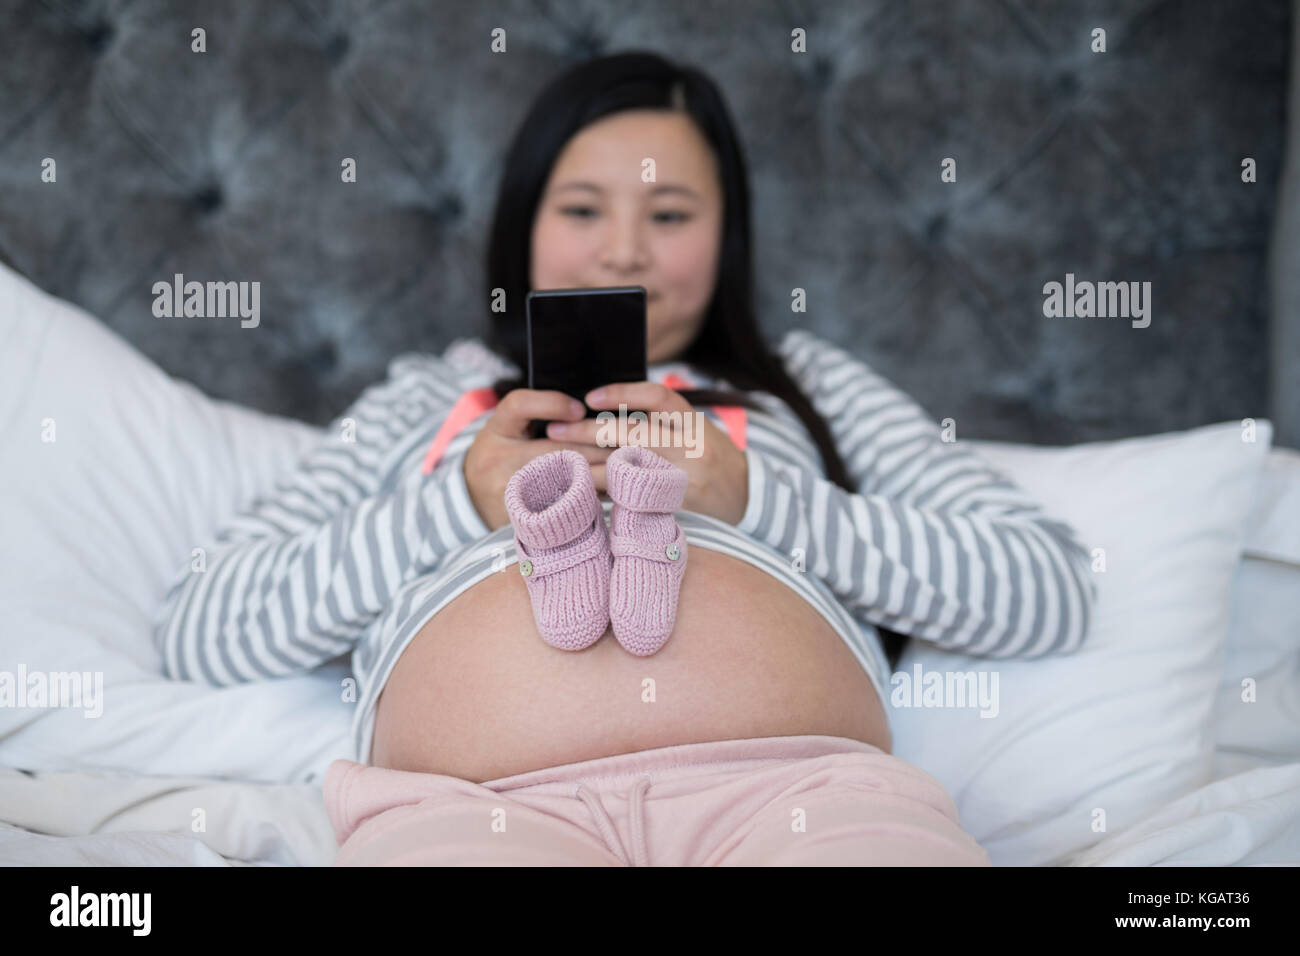 Pair of baby socks on pregnant woman stomach in bedroom Stock Photo